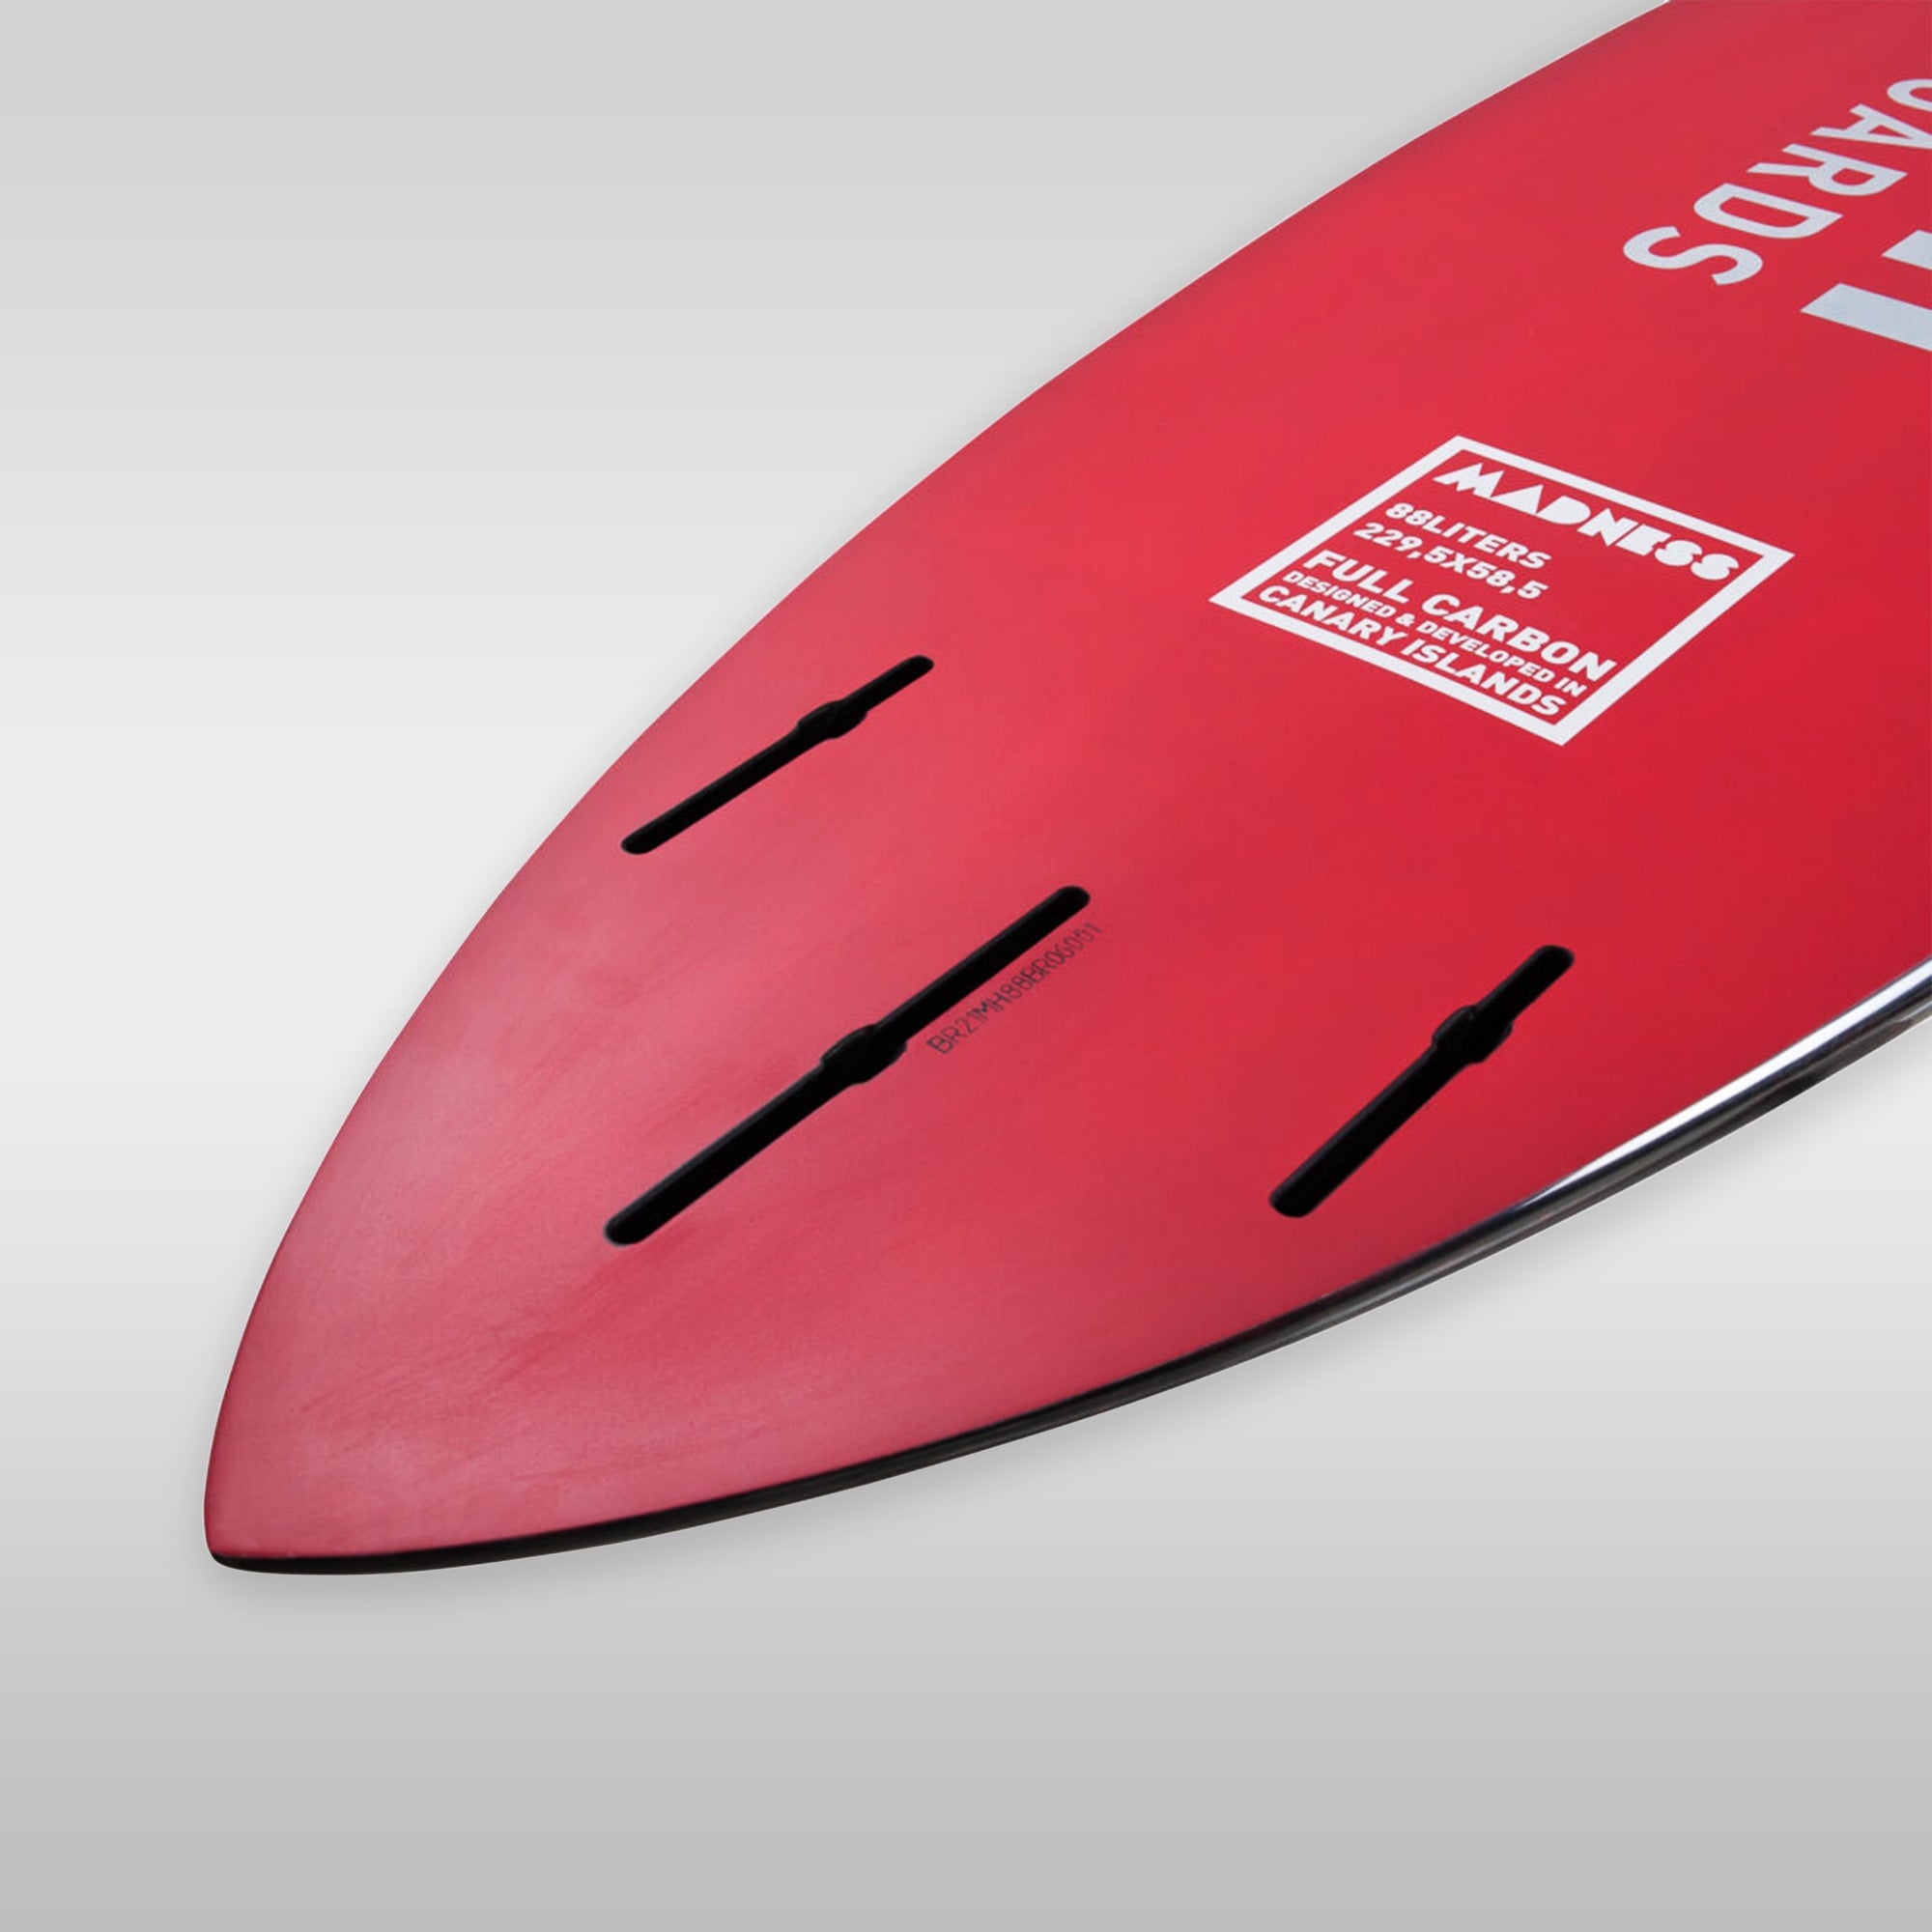 Windsurfshop windsurfwinkel windsurf-shop windsurfing store windsurfing BruchBoards by Dany Bruch Madness